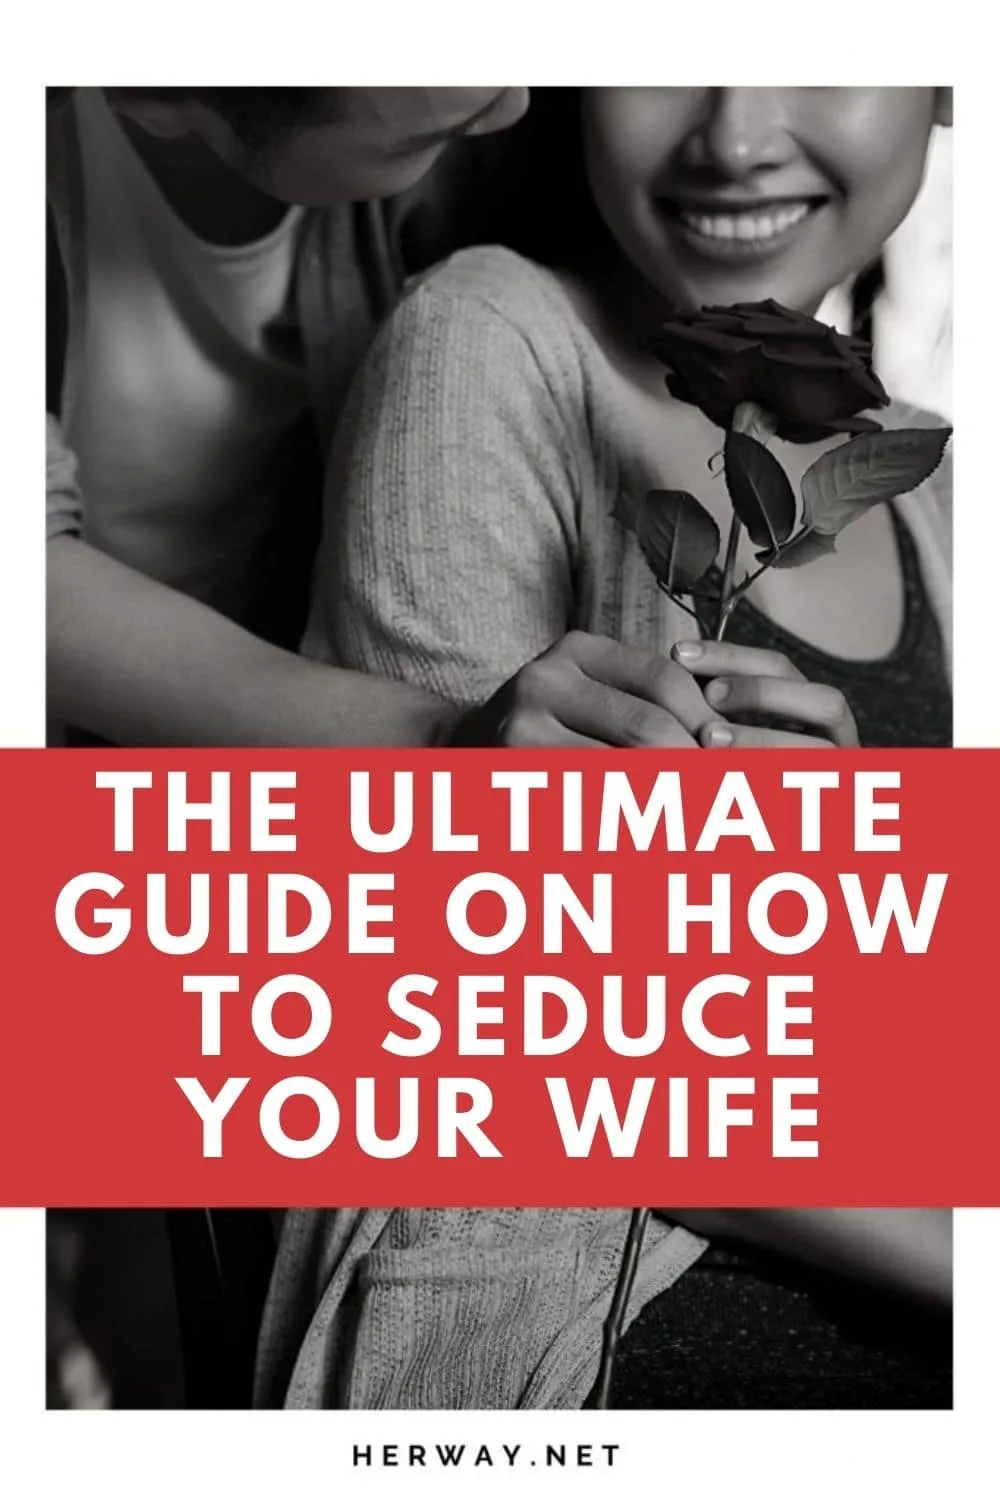 The Ultimate Guide On How To Seduce Your Wife